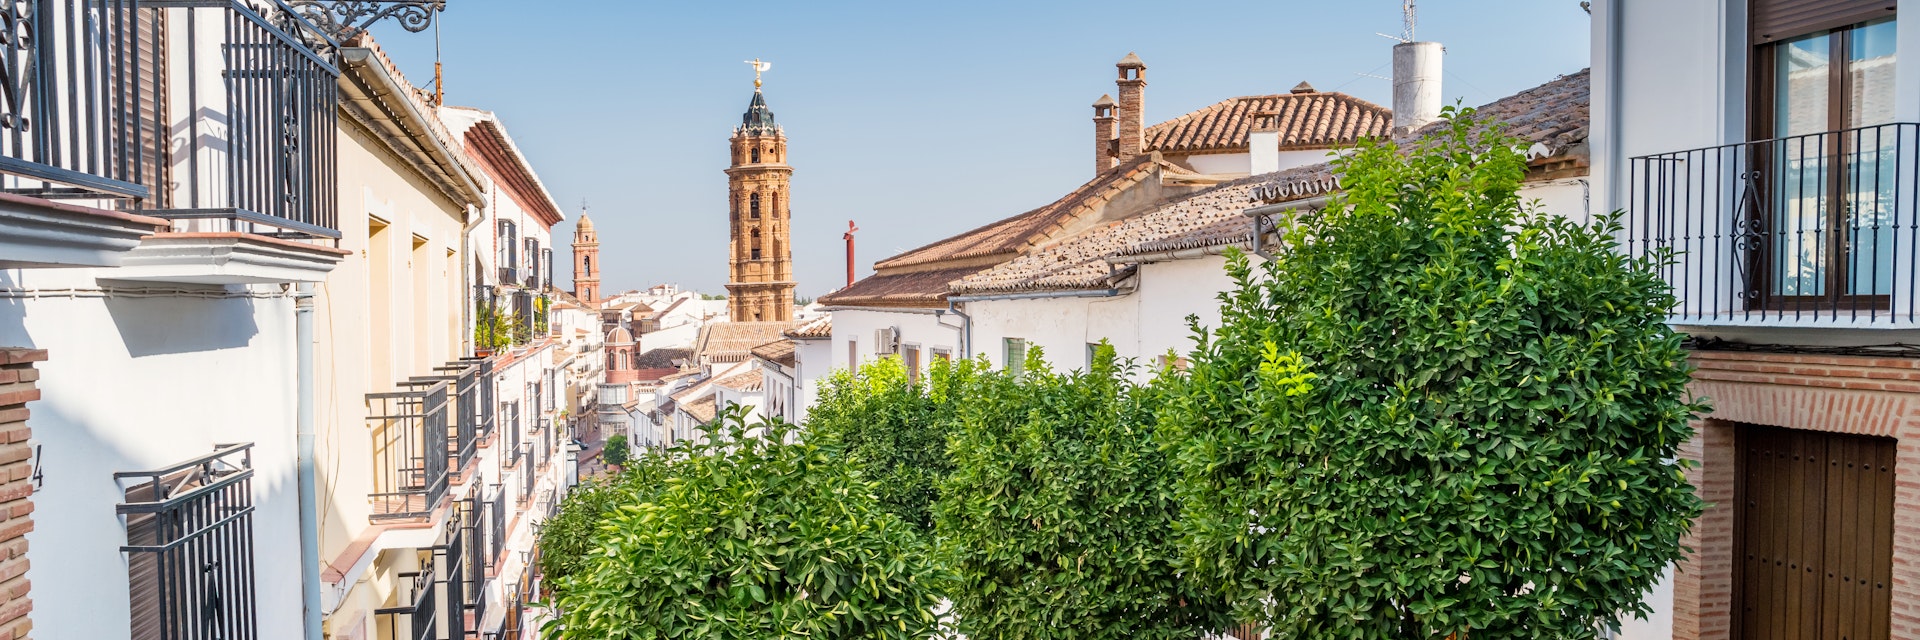 Citrus trees in downtown Antequera Andalusia Spain